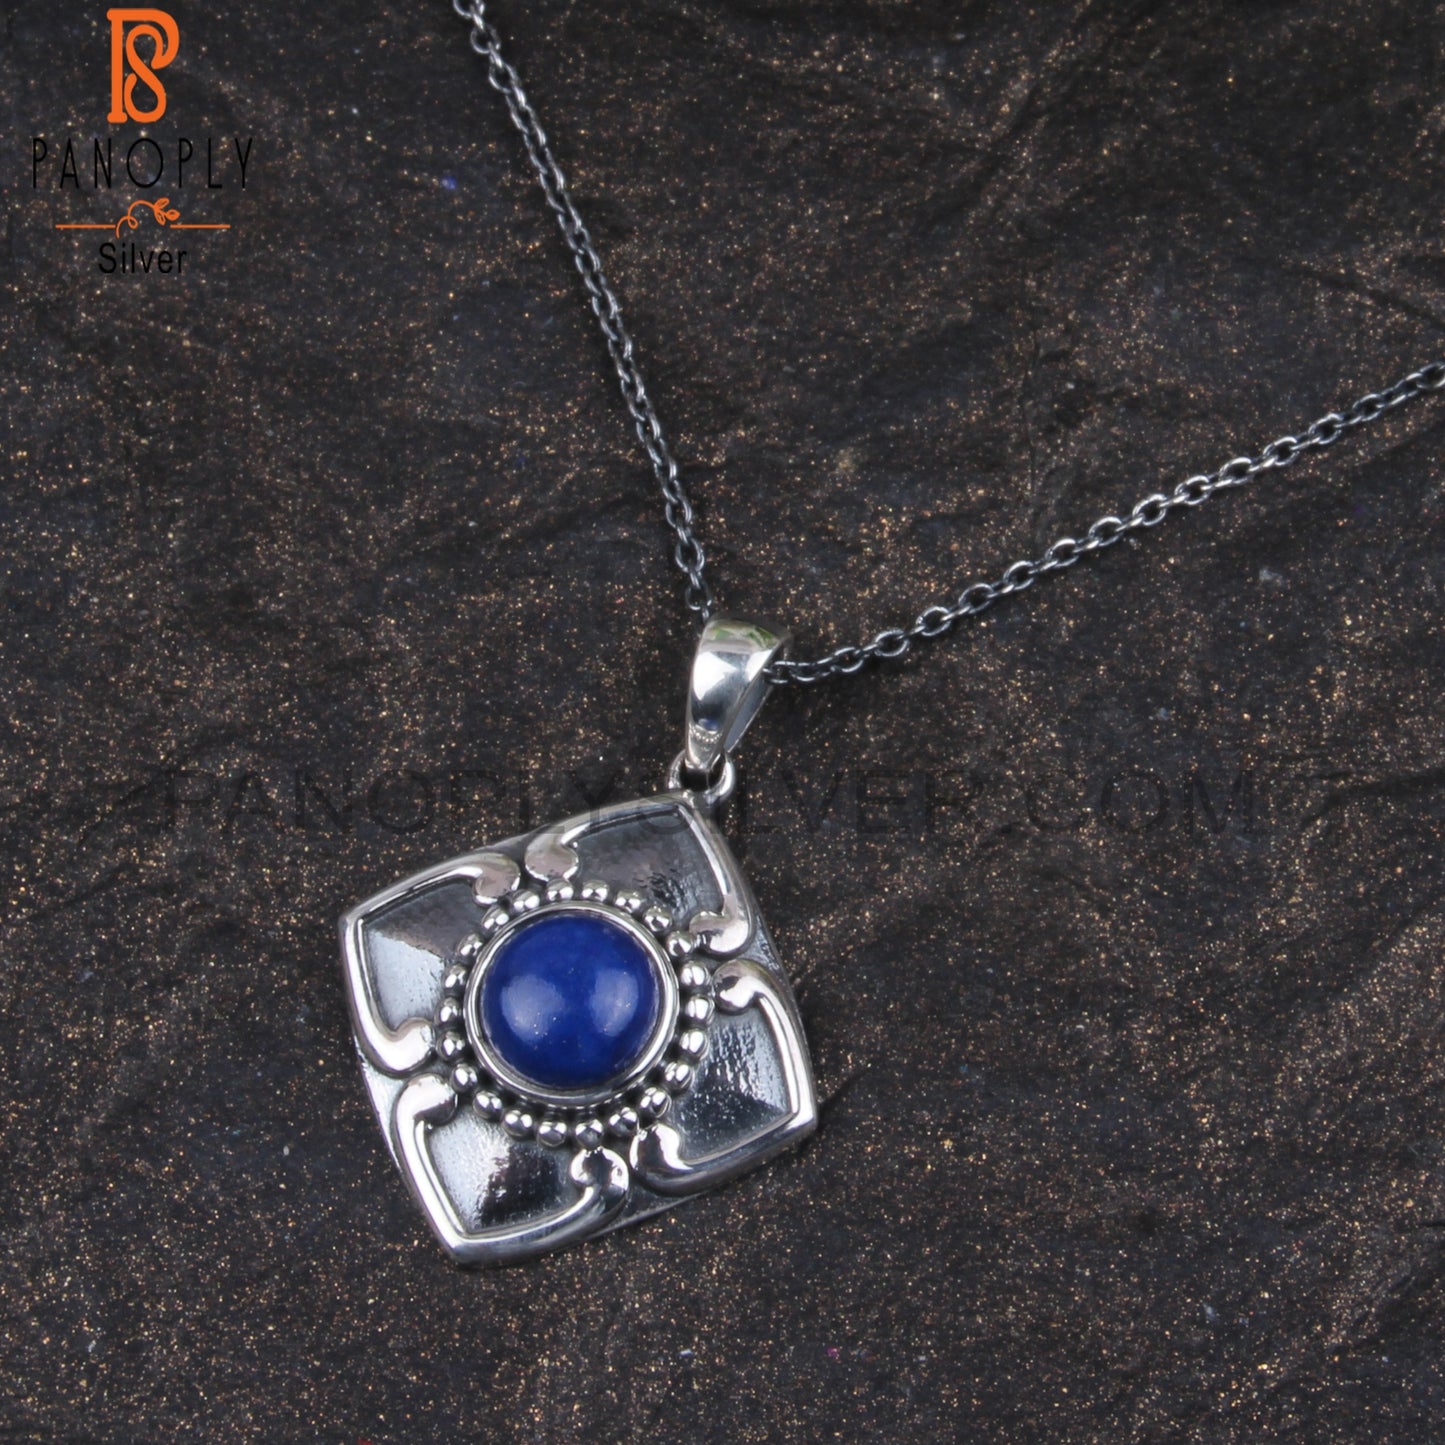 Lapis 925 Sterling Silver Pendant With Chain